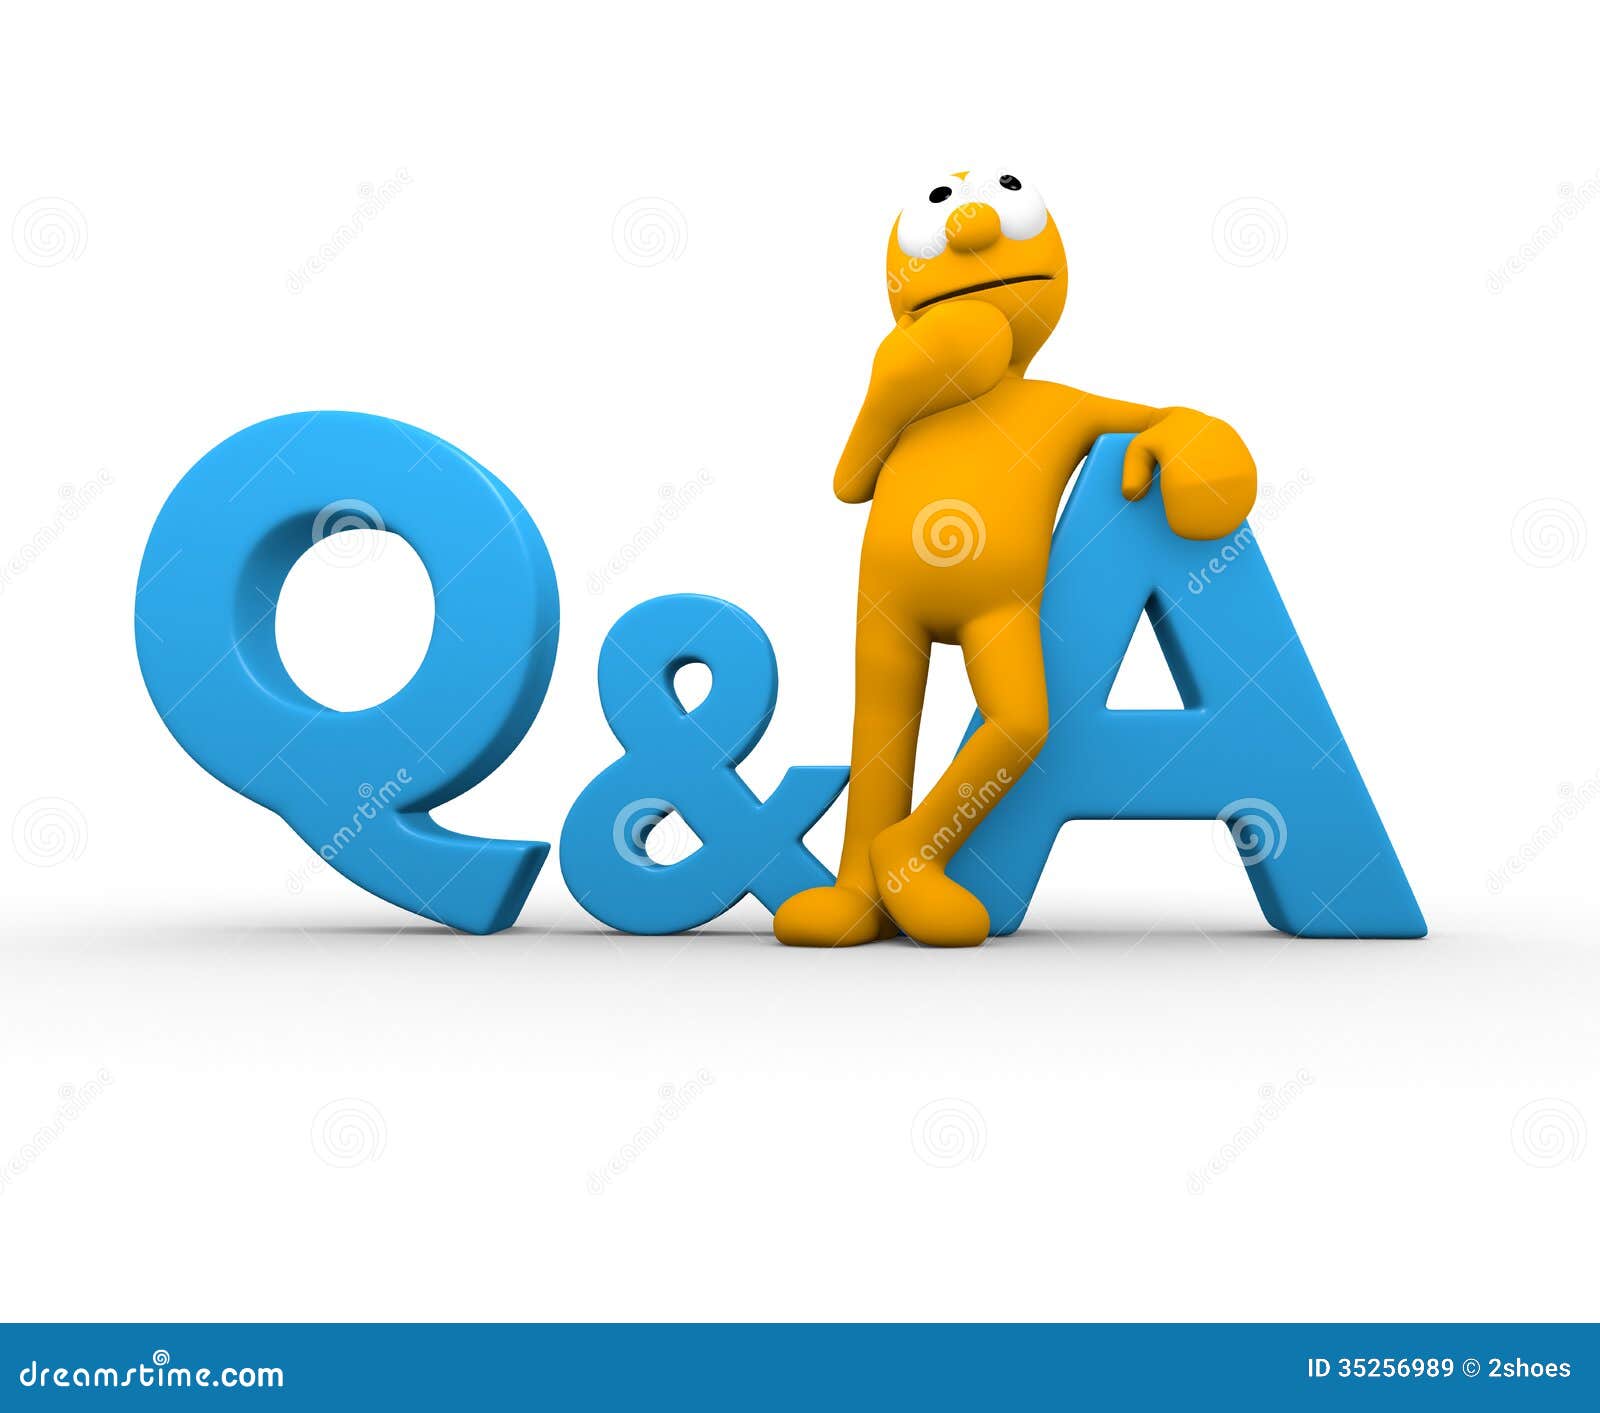 clipart for questions and answers - photo #4